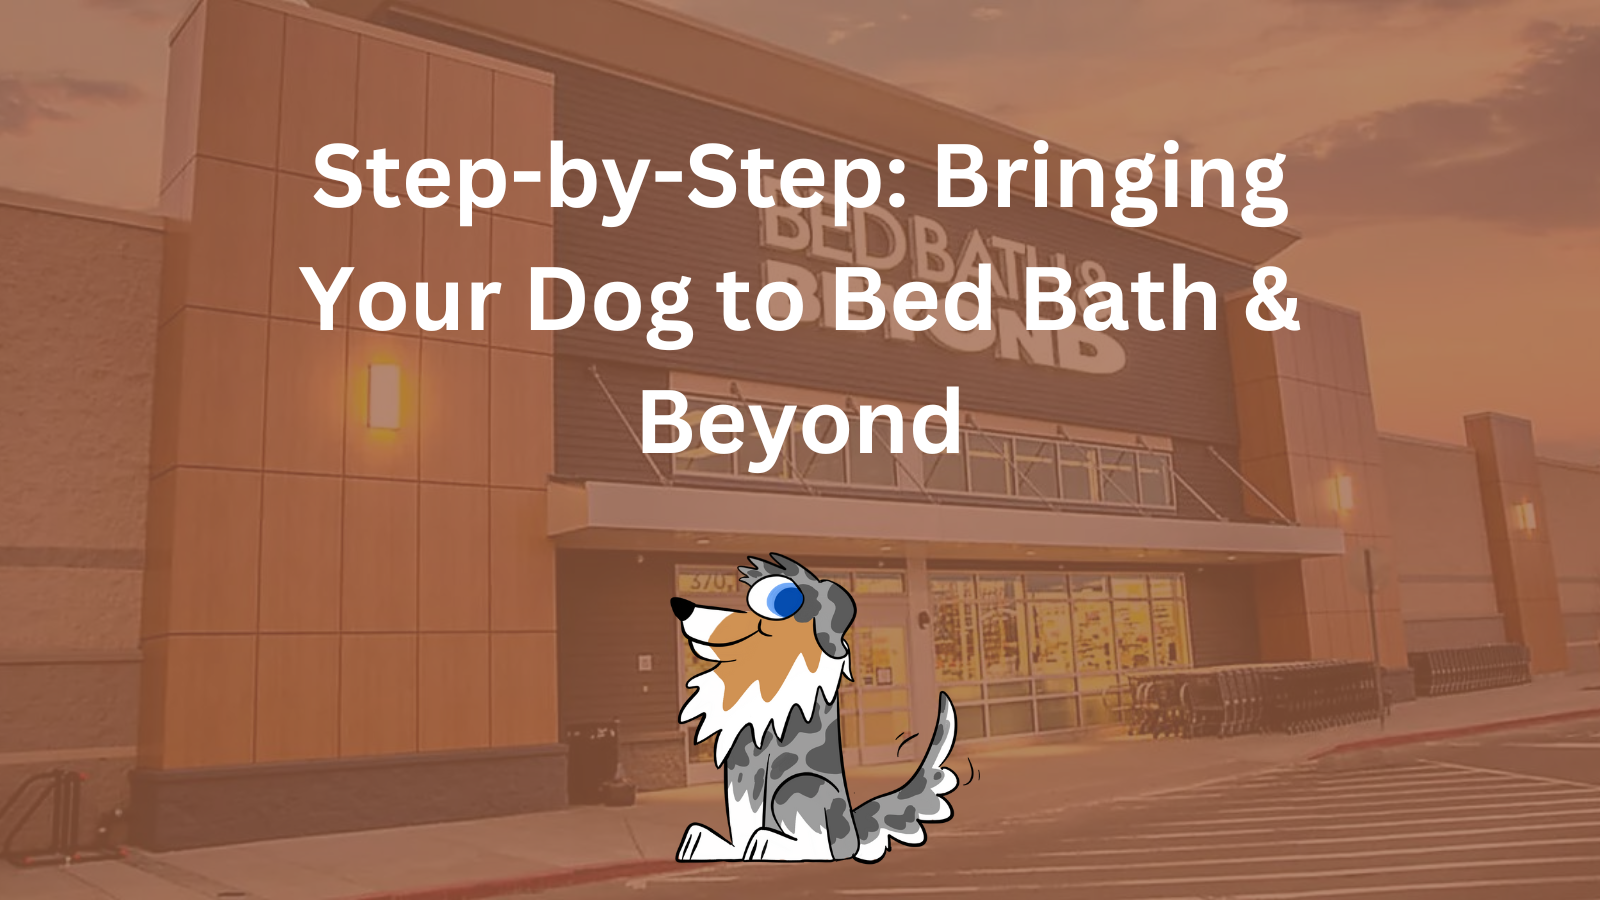 Image Text: "Step-by-Step: Bringing Your Dog to Bed Bath & Beyond"